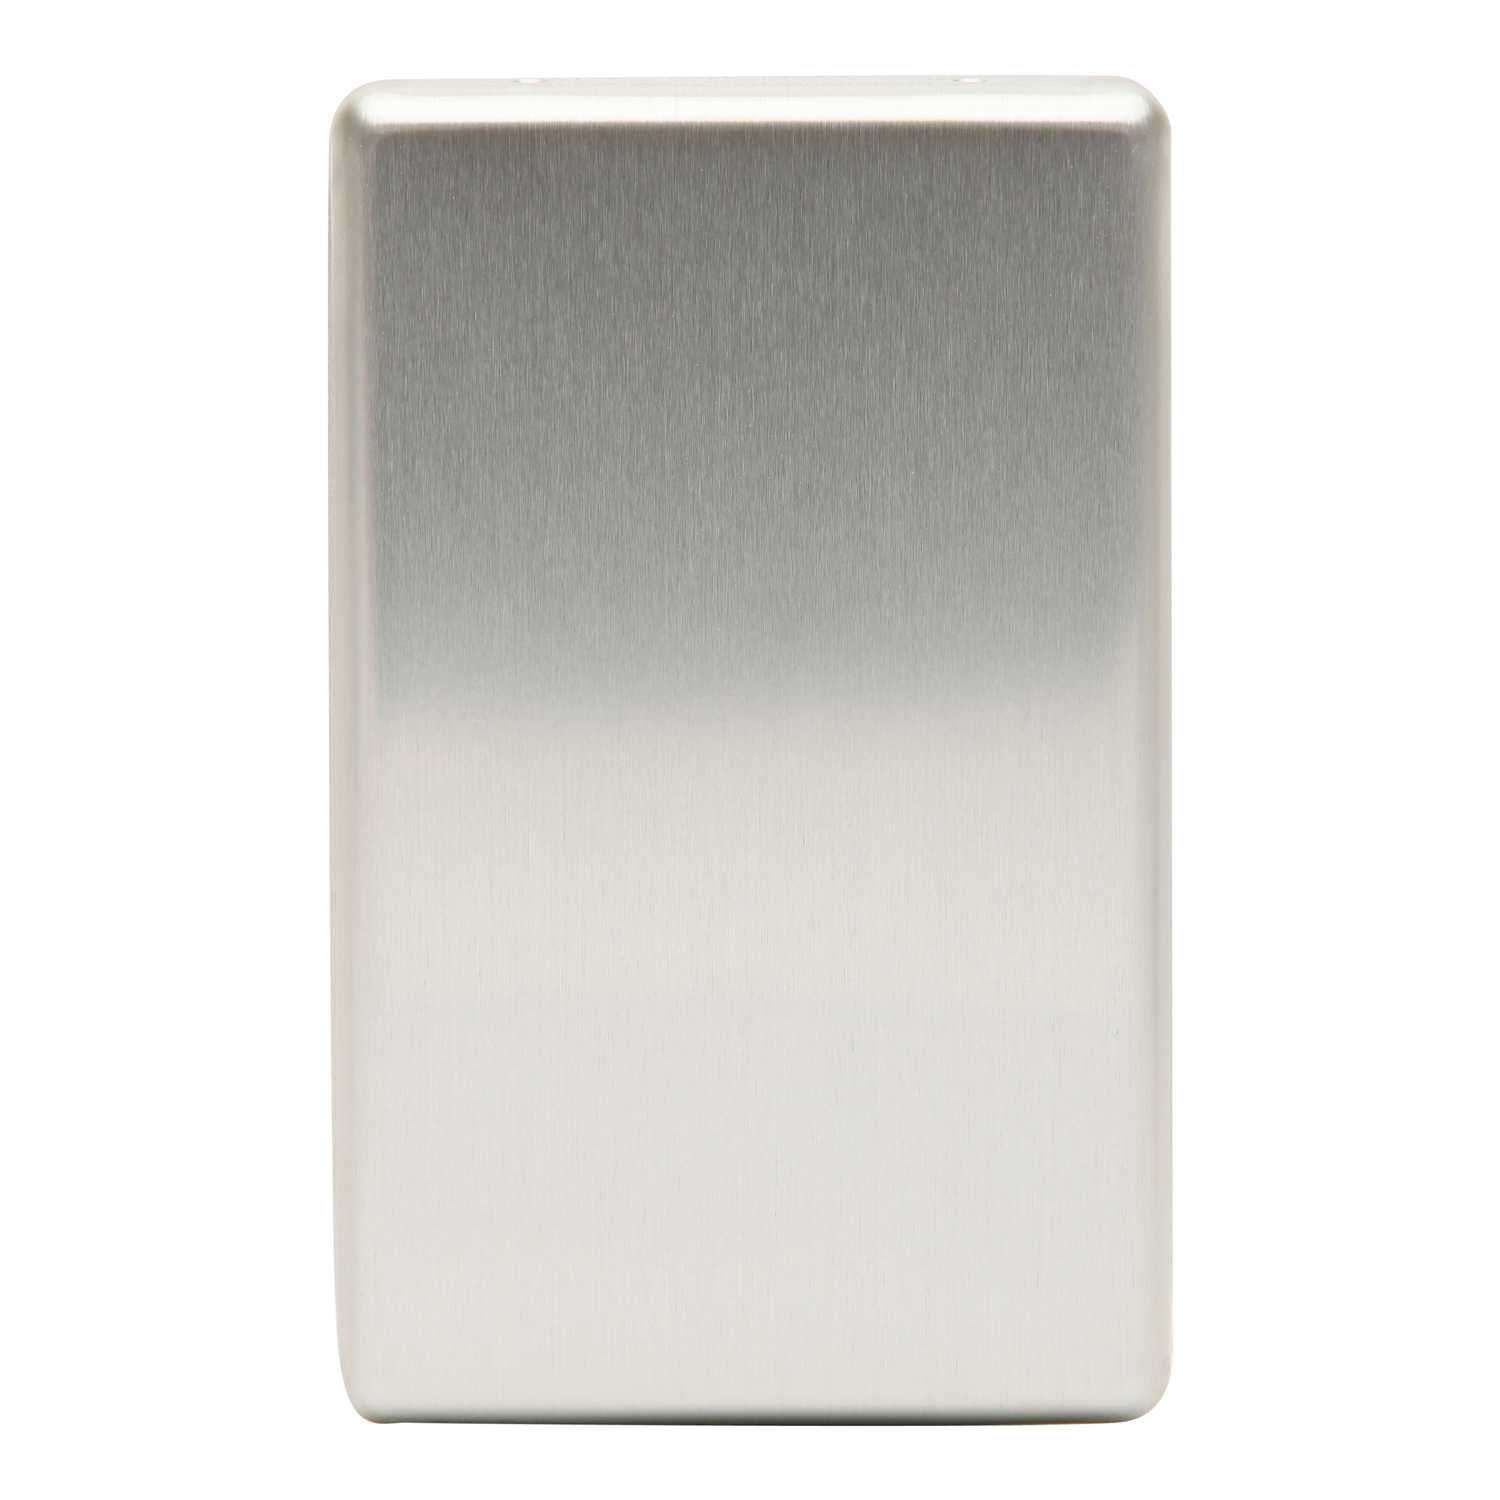 PDL 600 Series - Cover Plate Blank Switch - Stainless steel